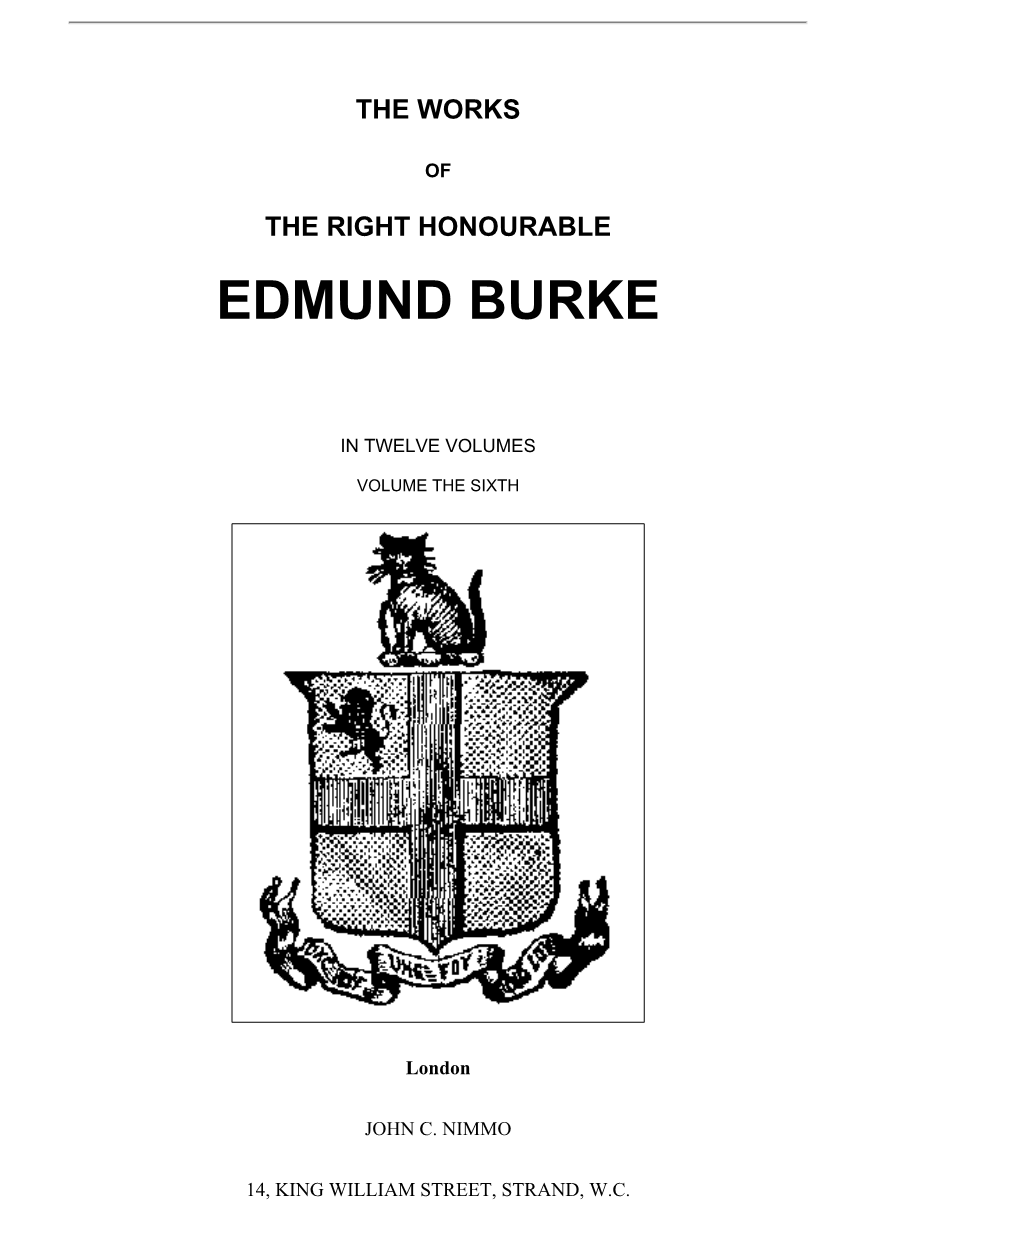 Burke's Writings and Speeches, Volume the Sixth, by Edmund Burke